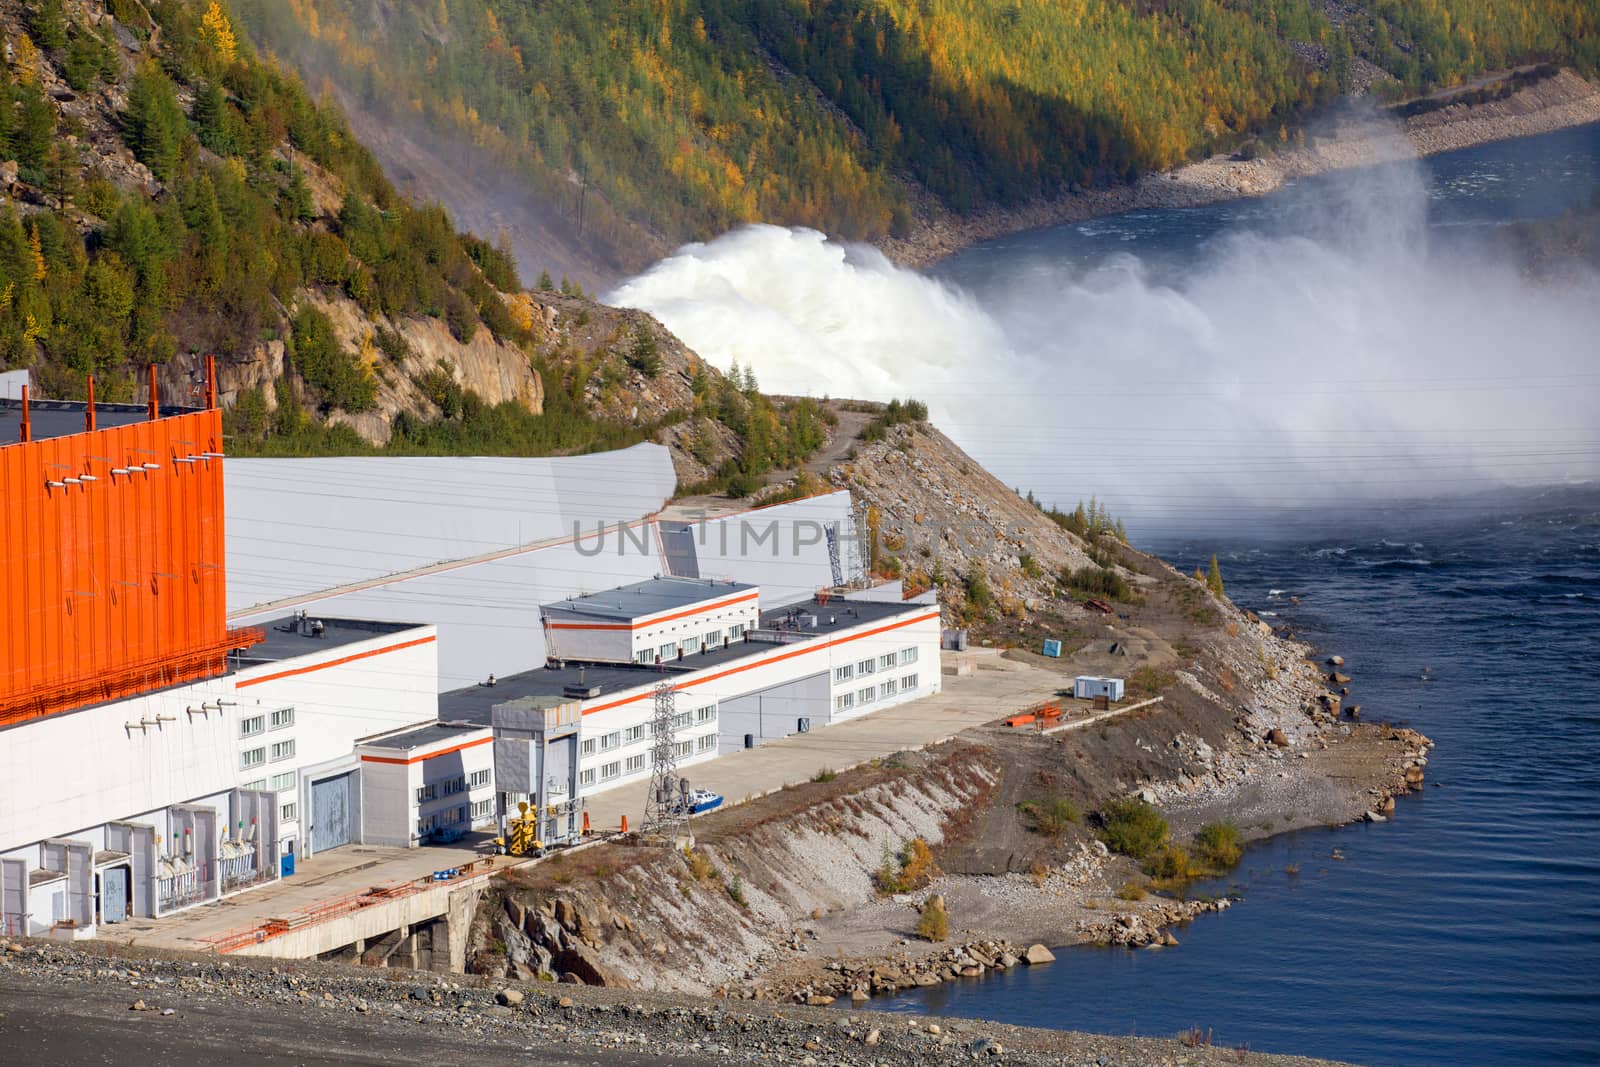 Kolyma hydroelectric power station in Magadan region, Russia. Spillway from the dam of the hydroelectric power station.